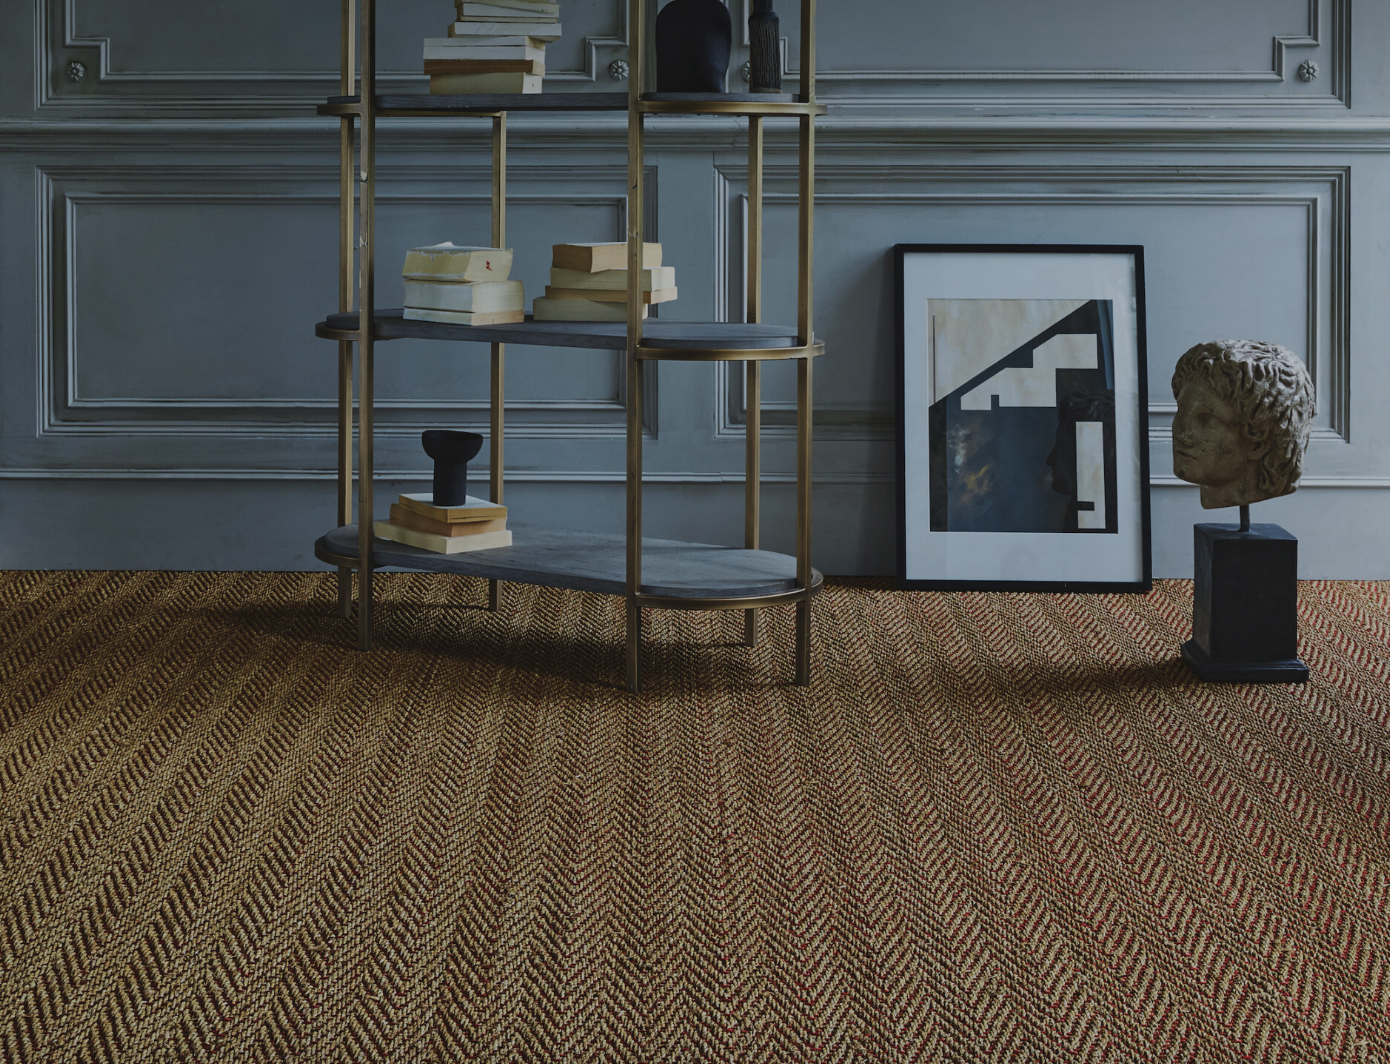 Understanding The Different Types Of Carpets & Their Benefits